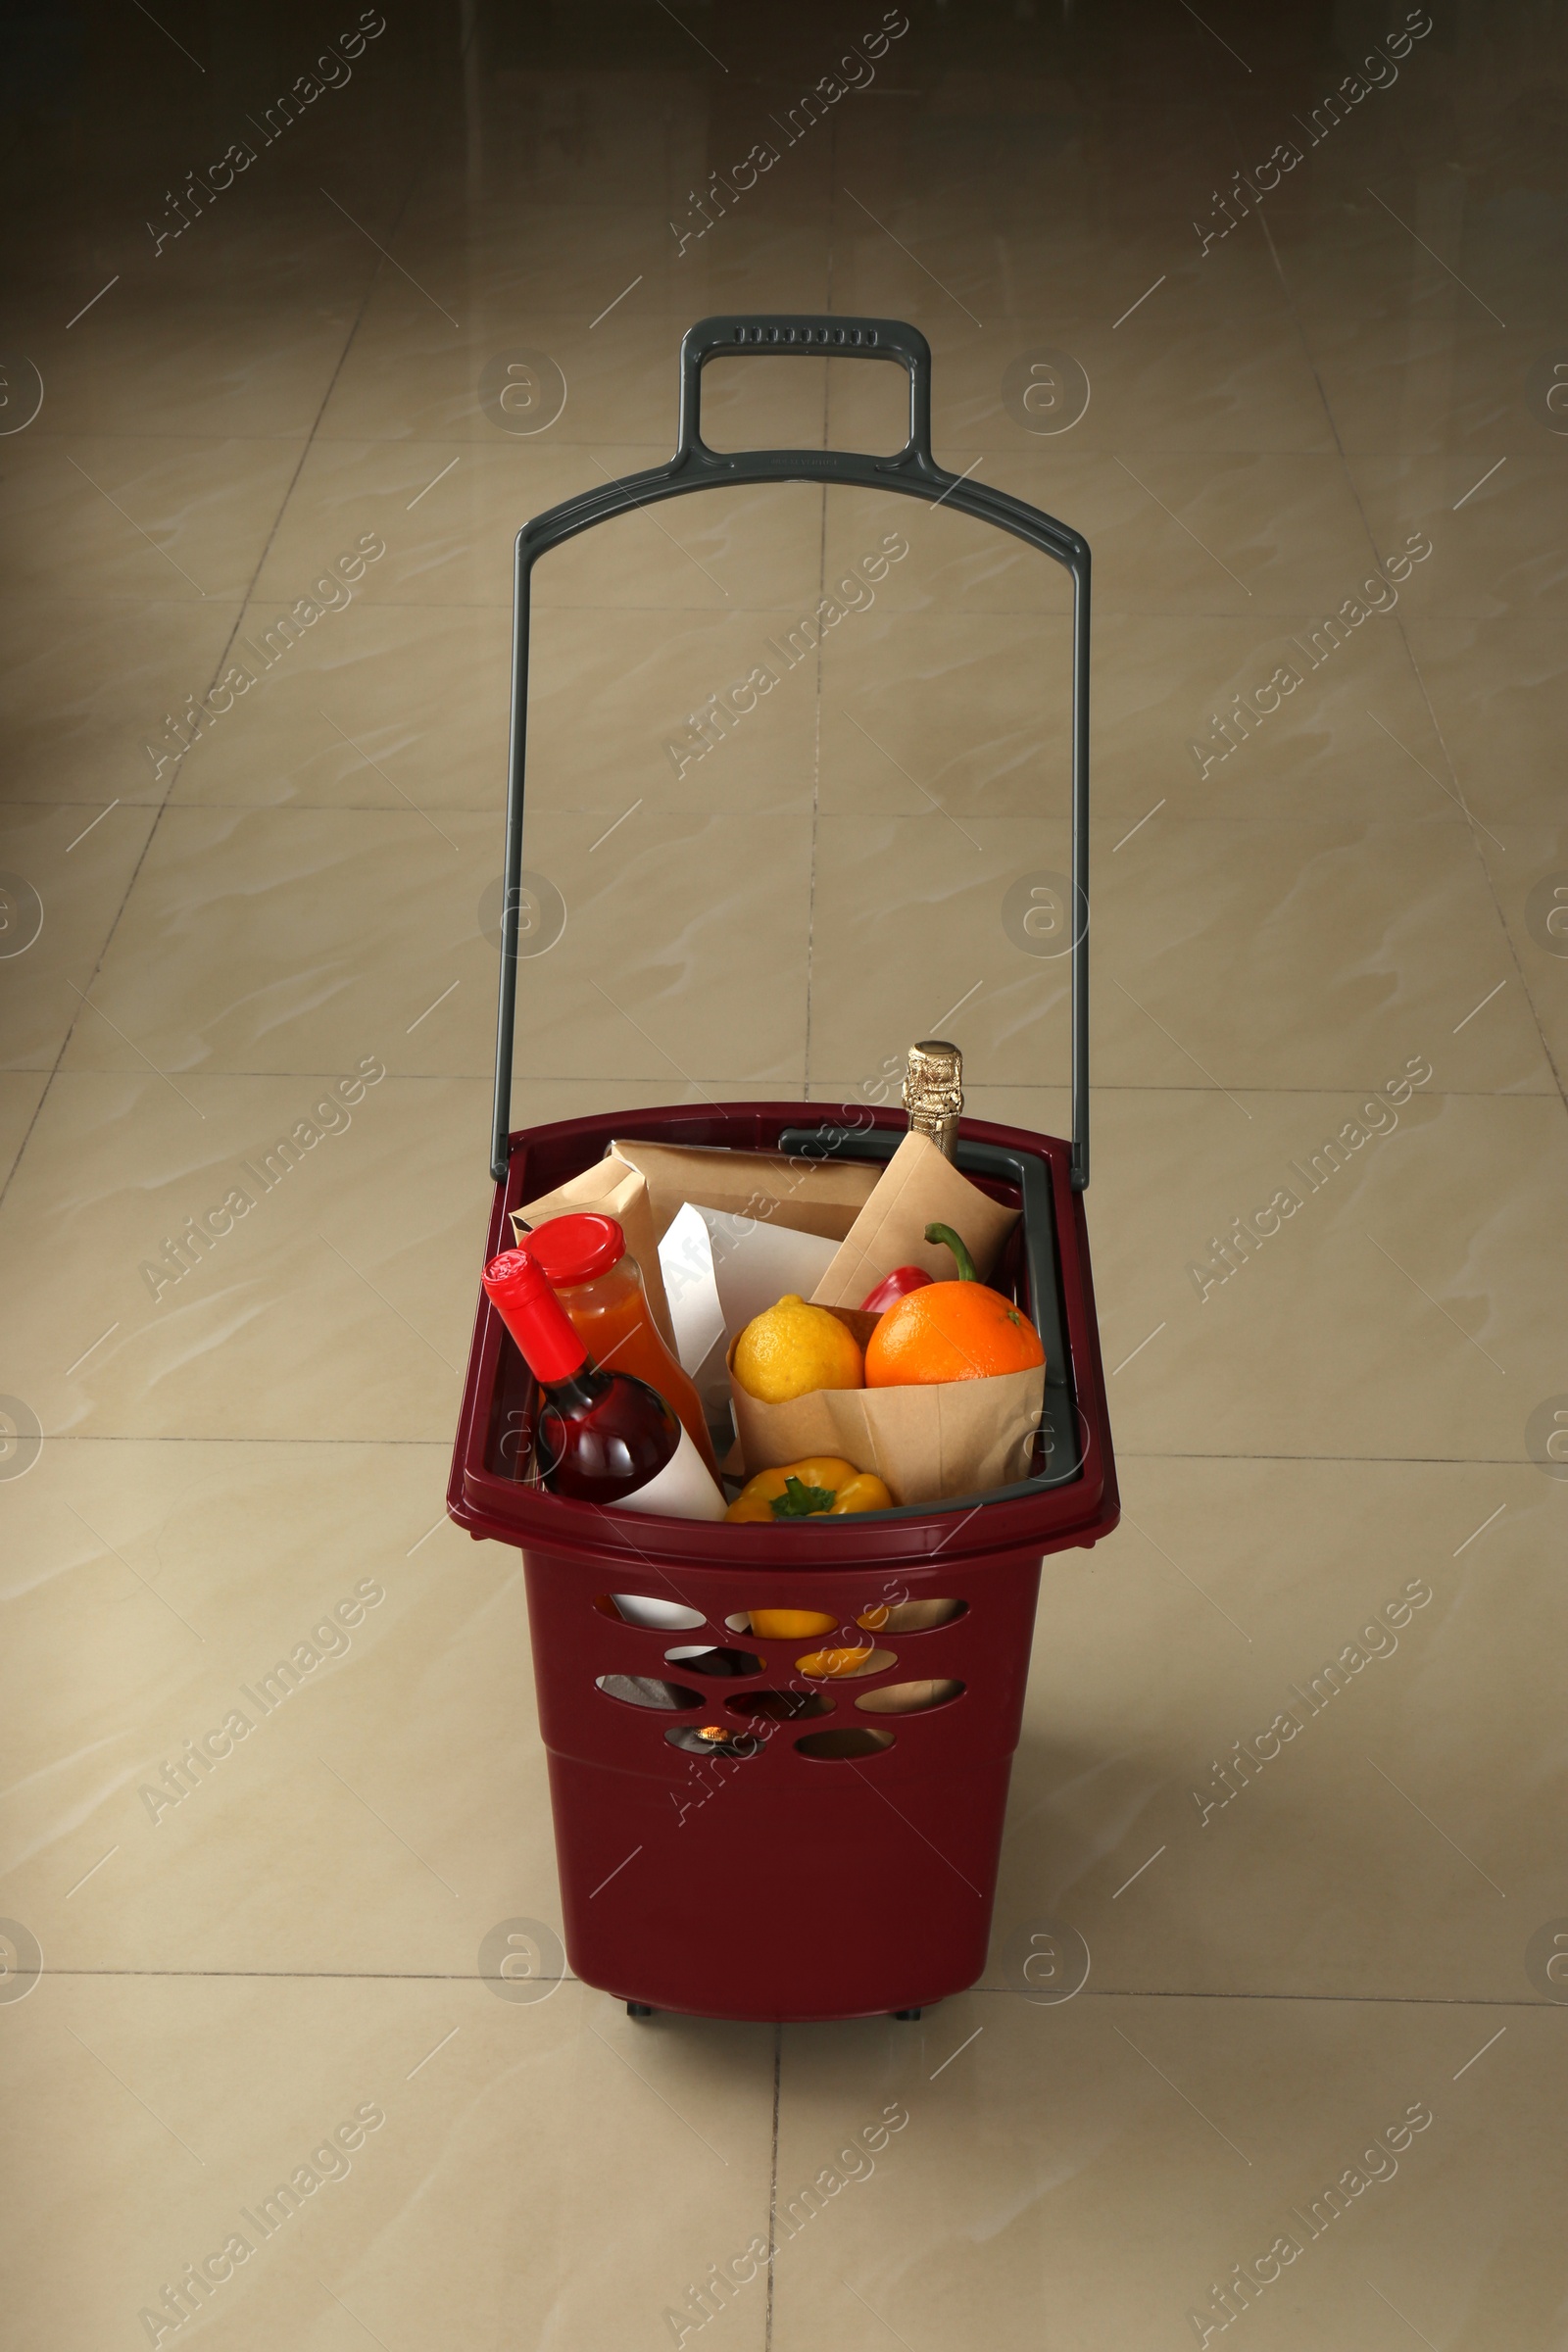 Photo of Shopping basket full of different products on beige tile floor